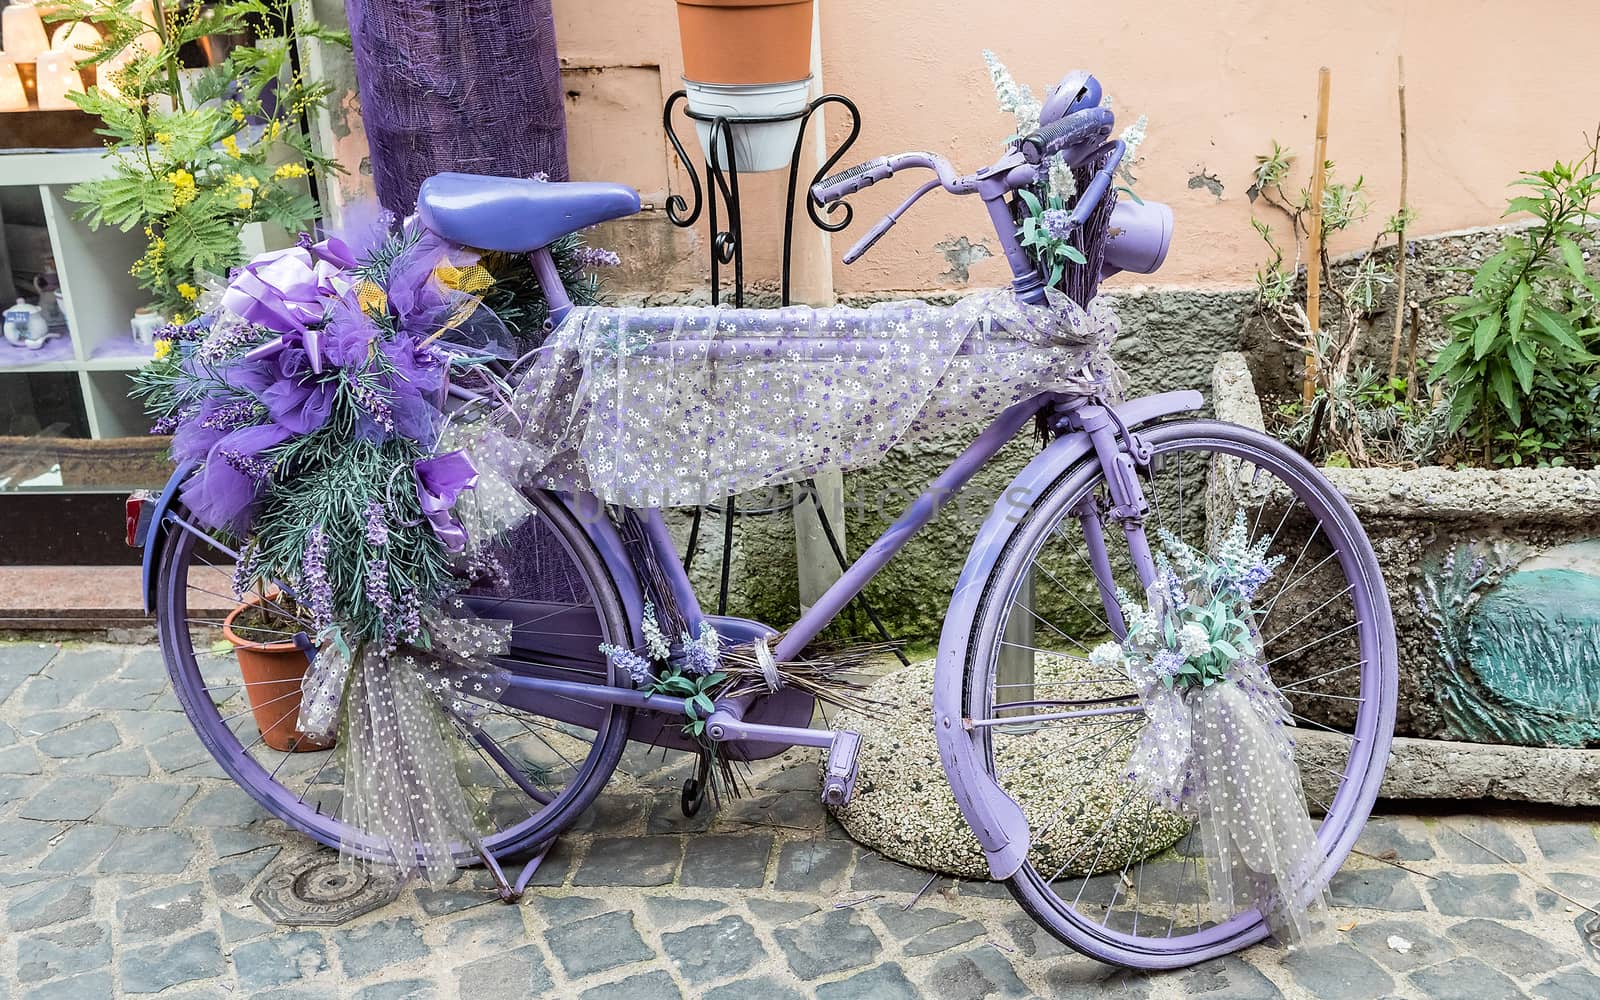 Vintage violet bicycle decorated with flowers and laces